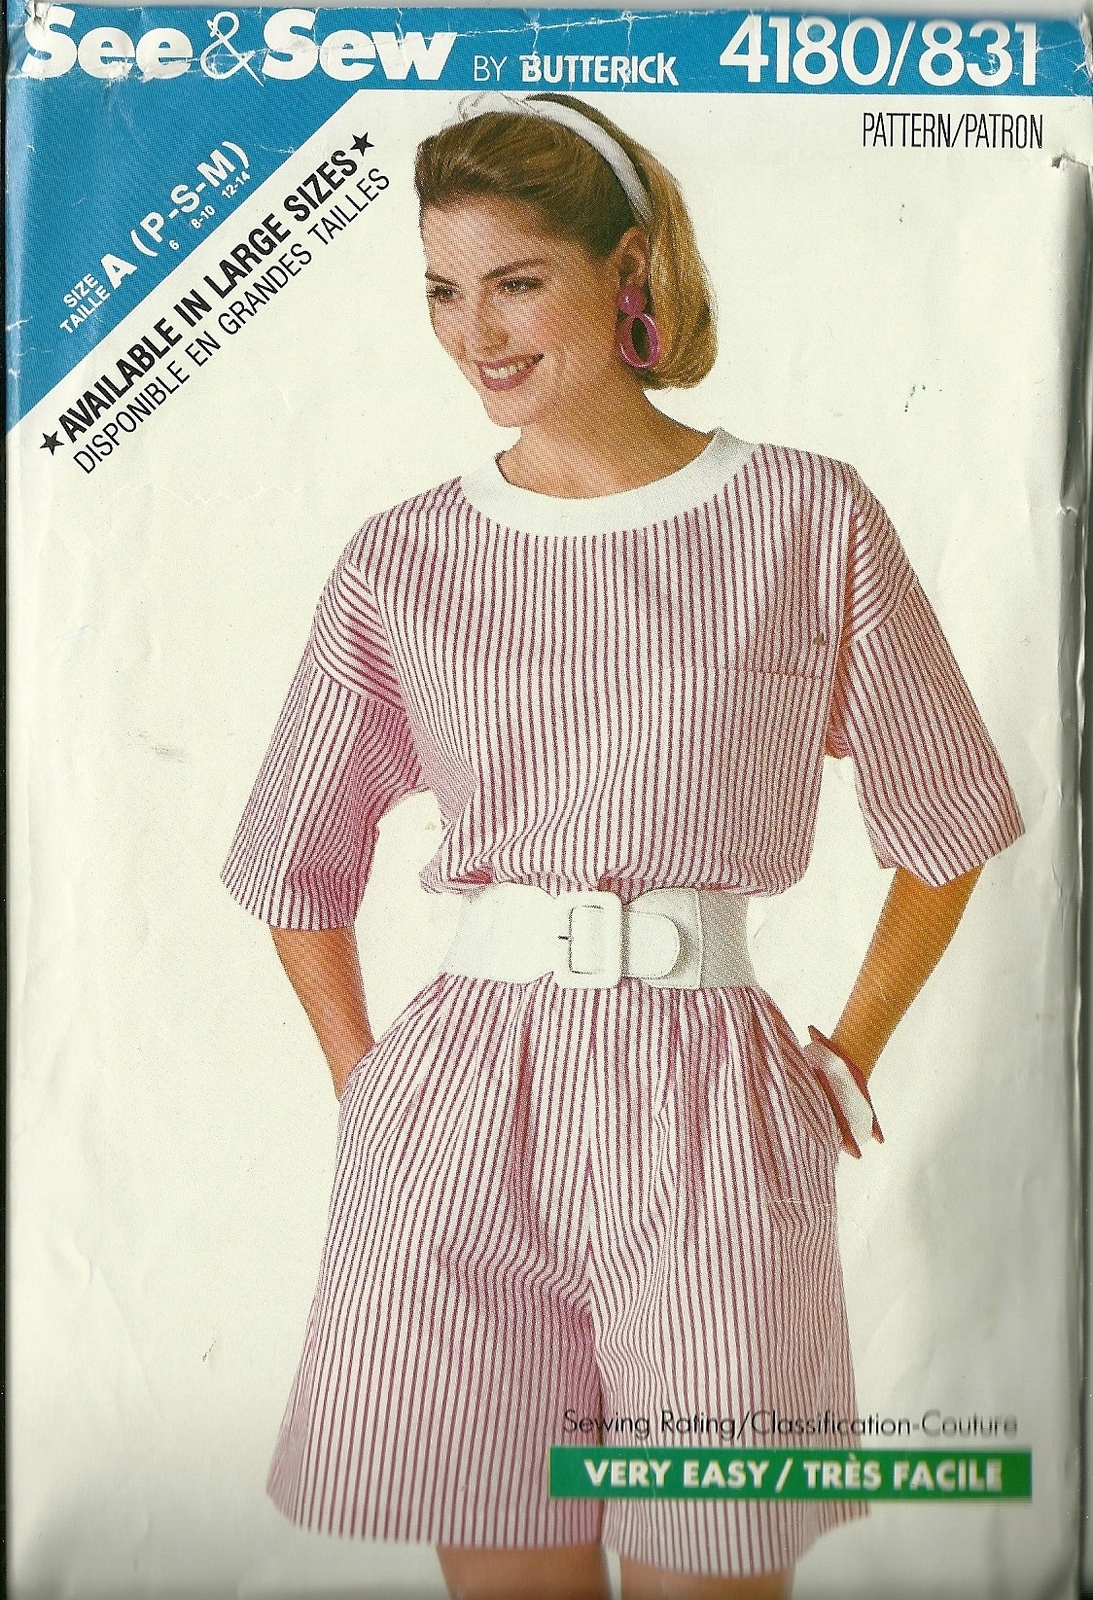 See And Sew Sewing Pattern 4180 831 Misses Womens Top Shorts 6 8 10 12 14 Used - $9.98